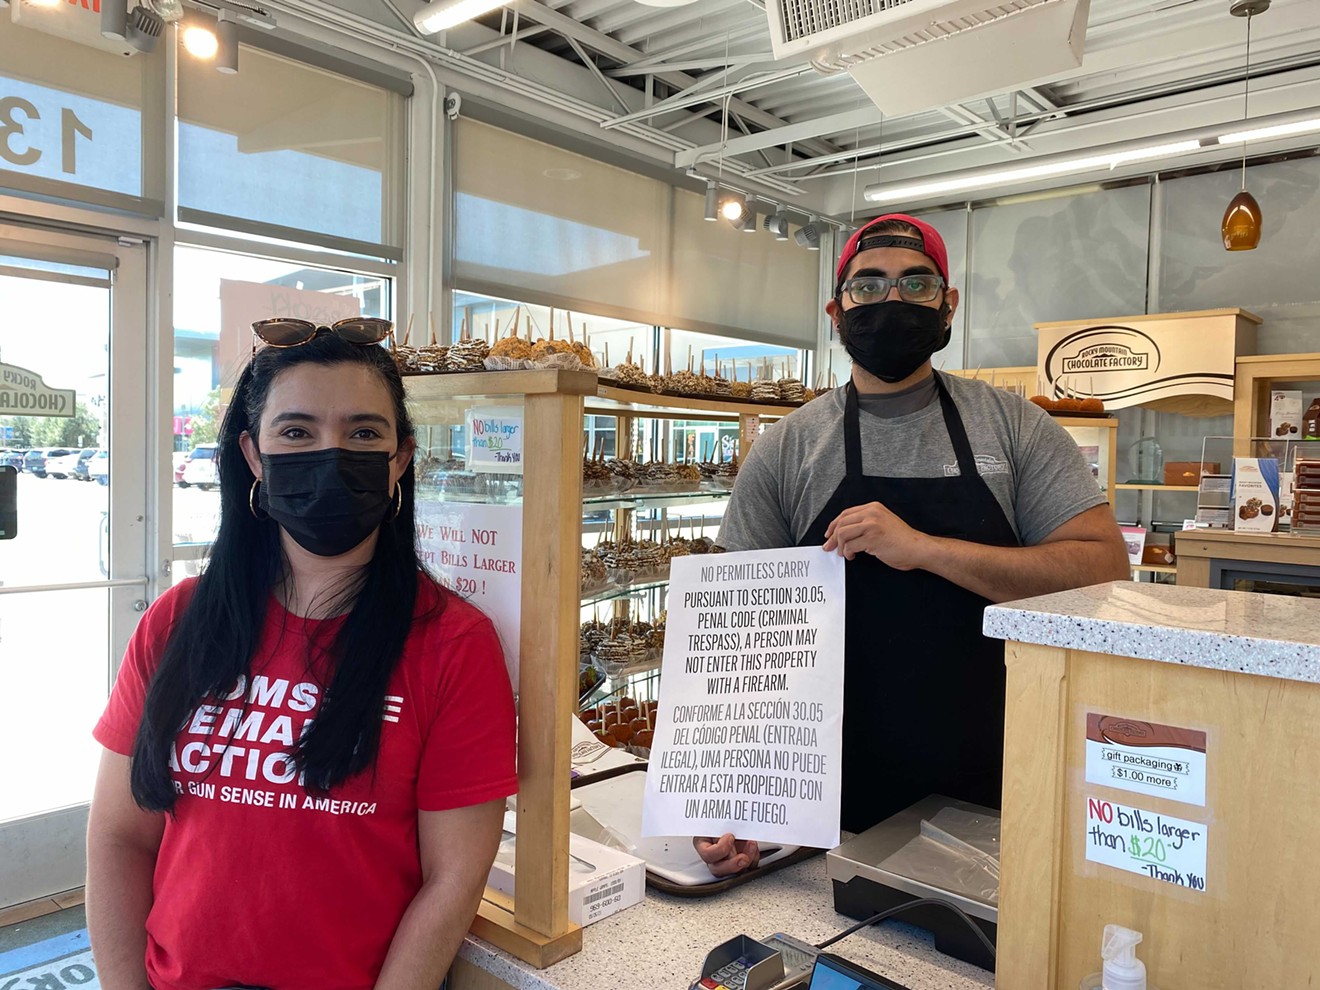 Moms Demand Action volunteers are equipping business owners with signs prohibiting firearms.